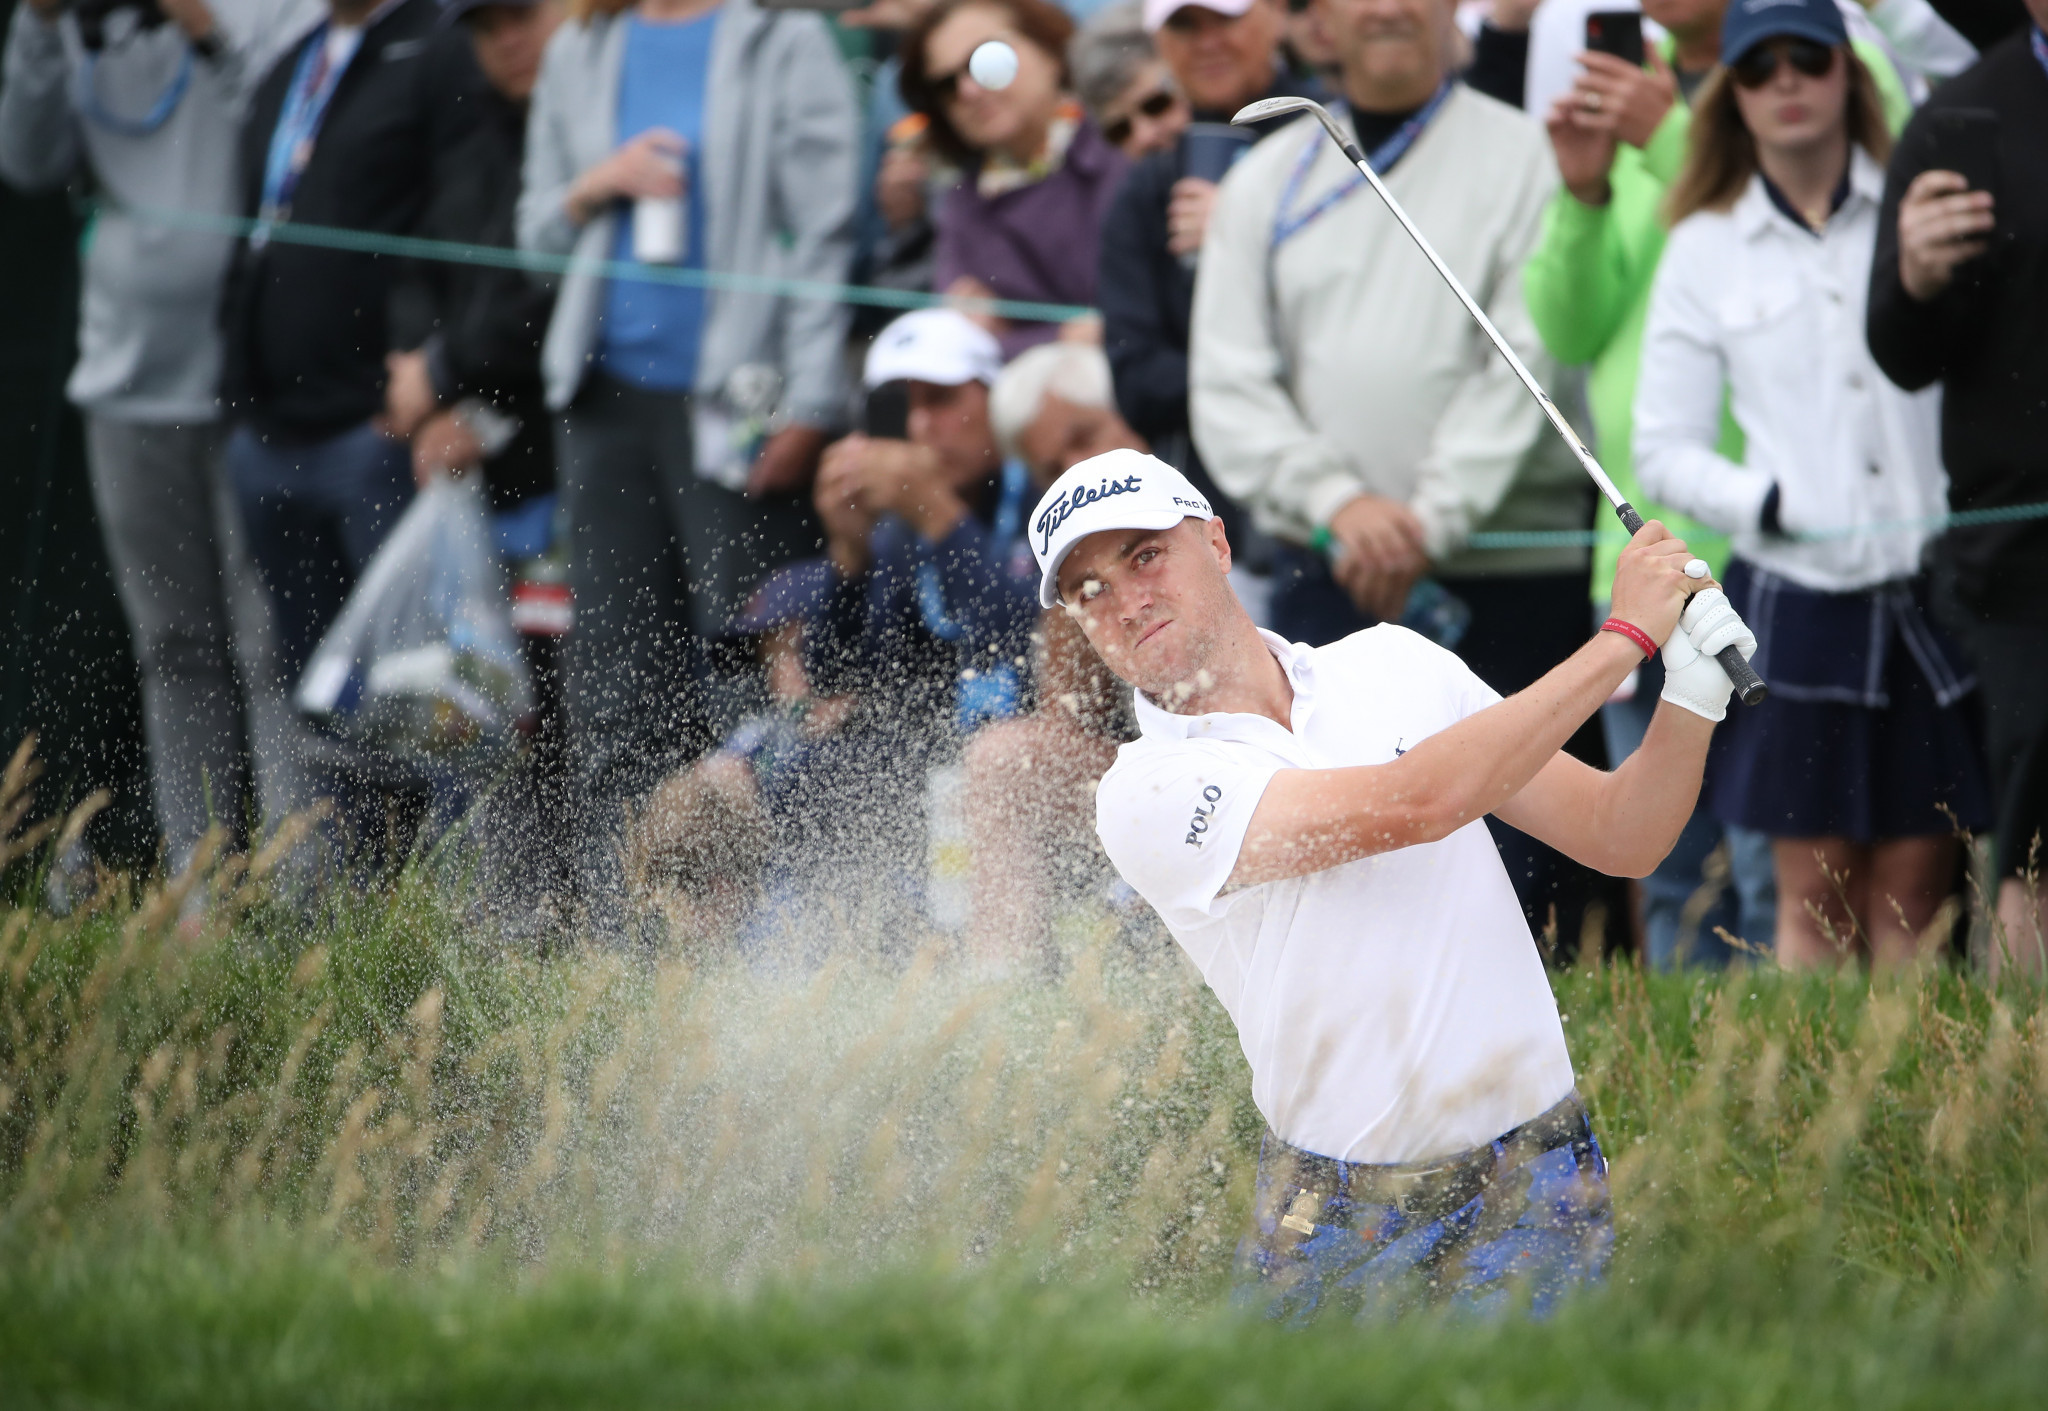 Justin Thomas of the United States plays a bunker shot at Pebble Beach Golf Links ©Getty Images